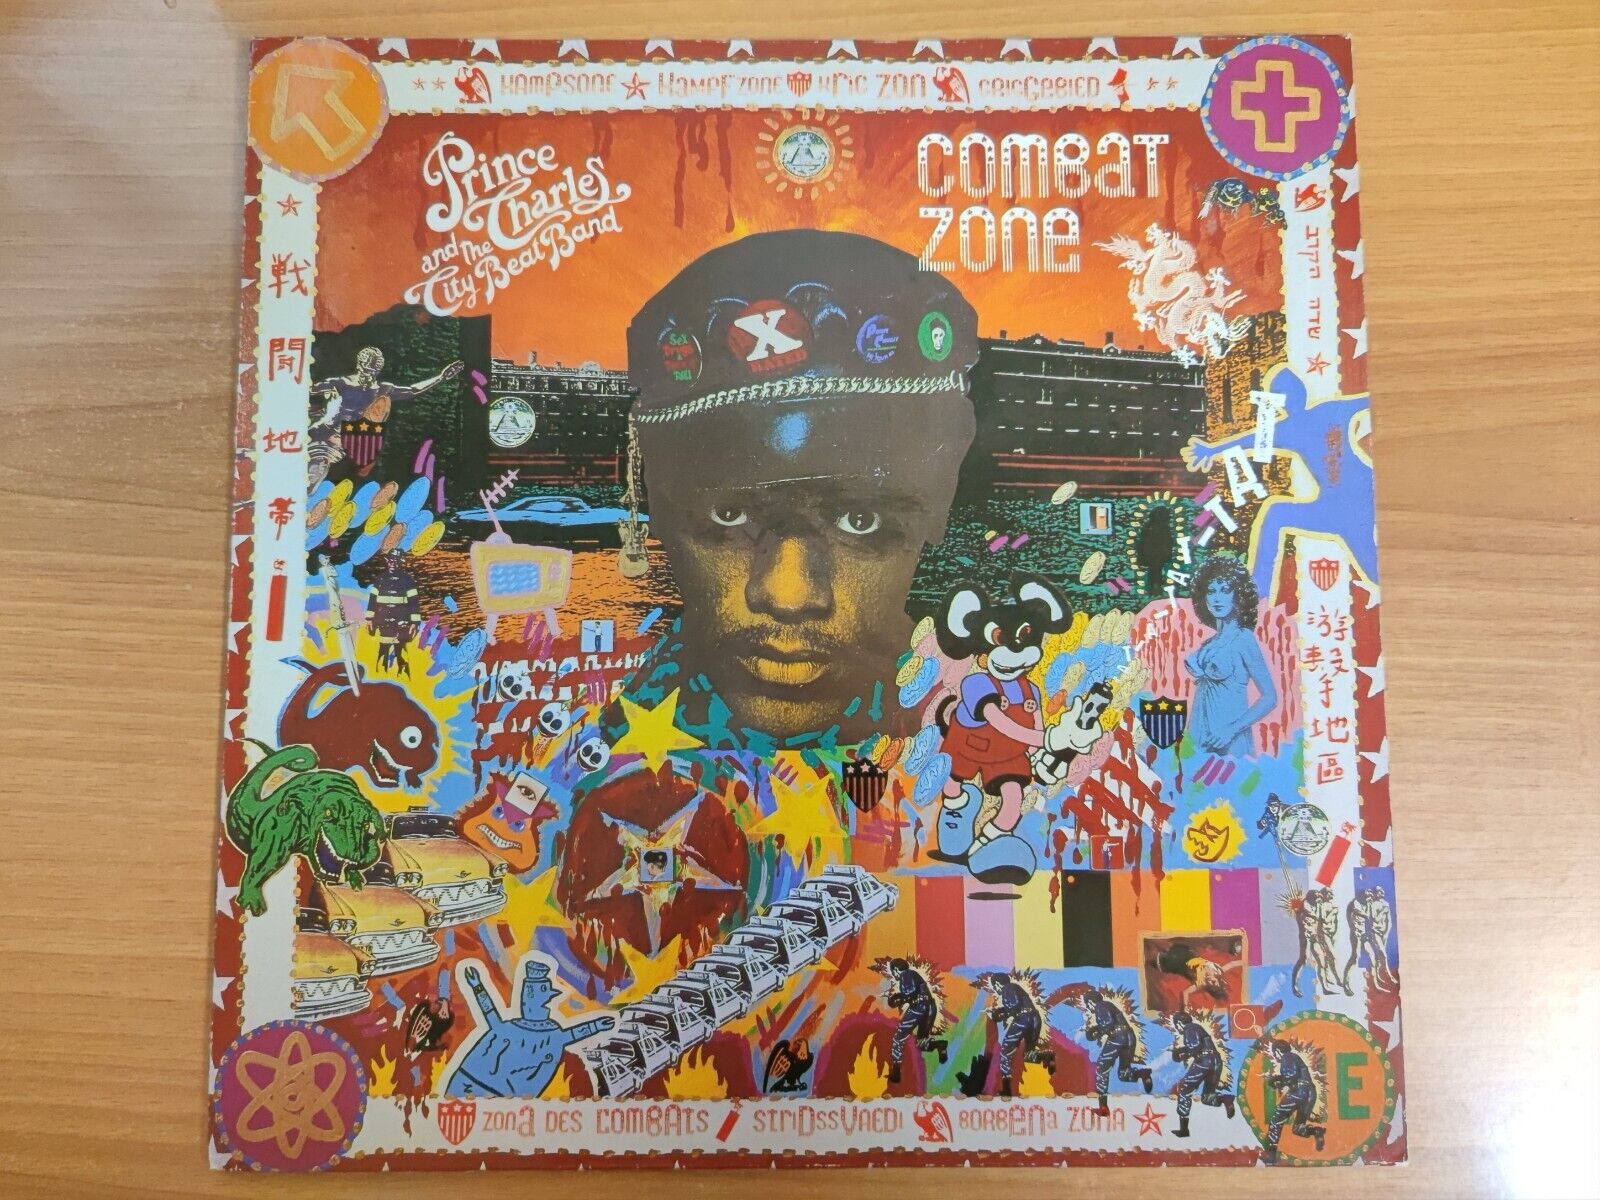 Prince Charles And The City Beat Band – Combat Zone (1984, Vinyl)